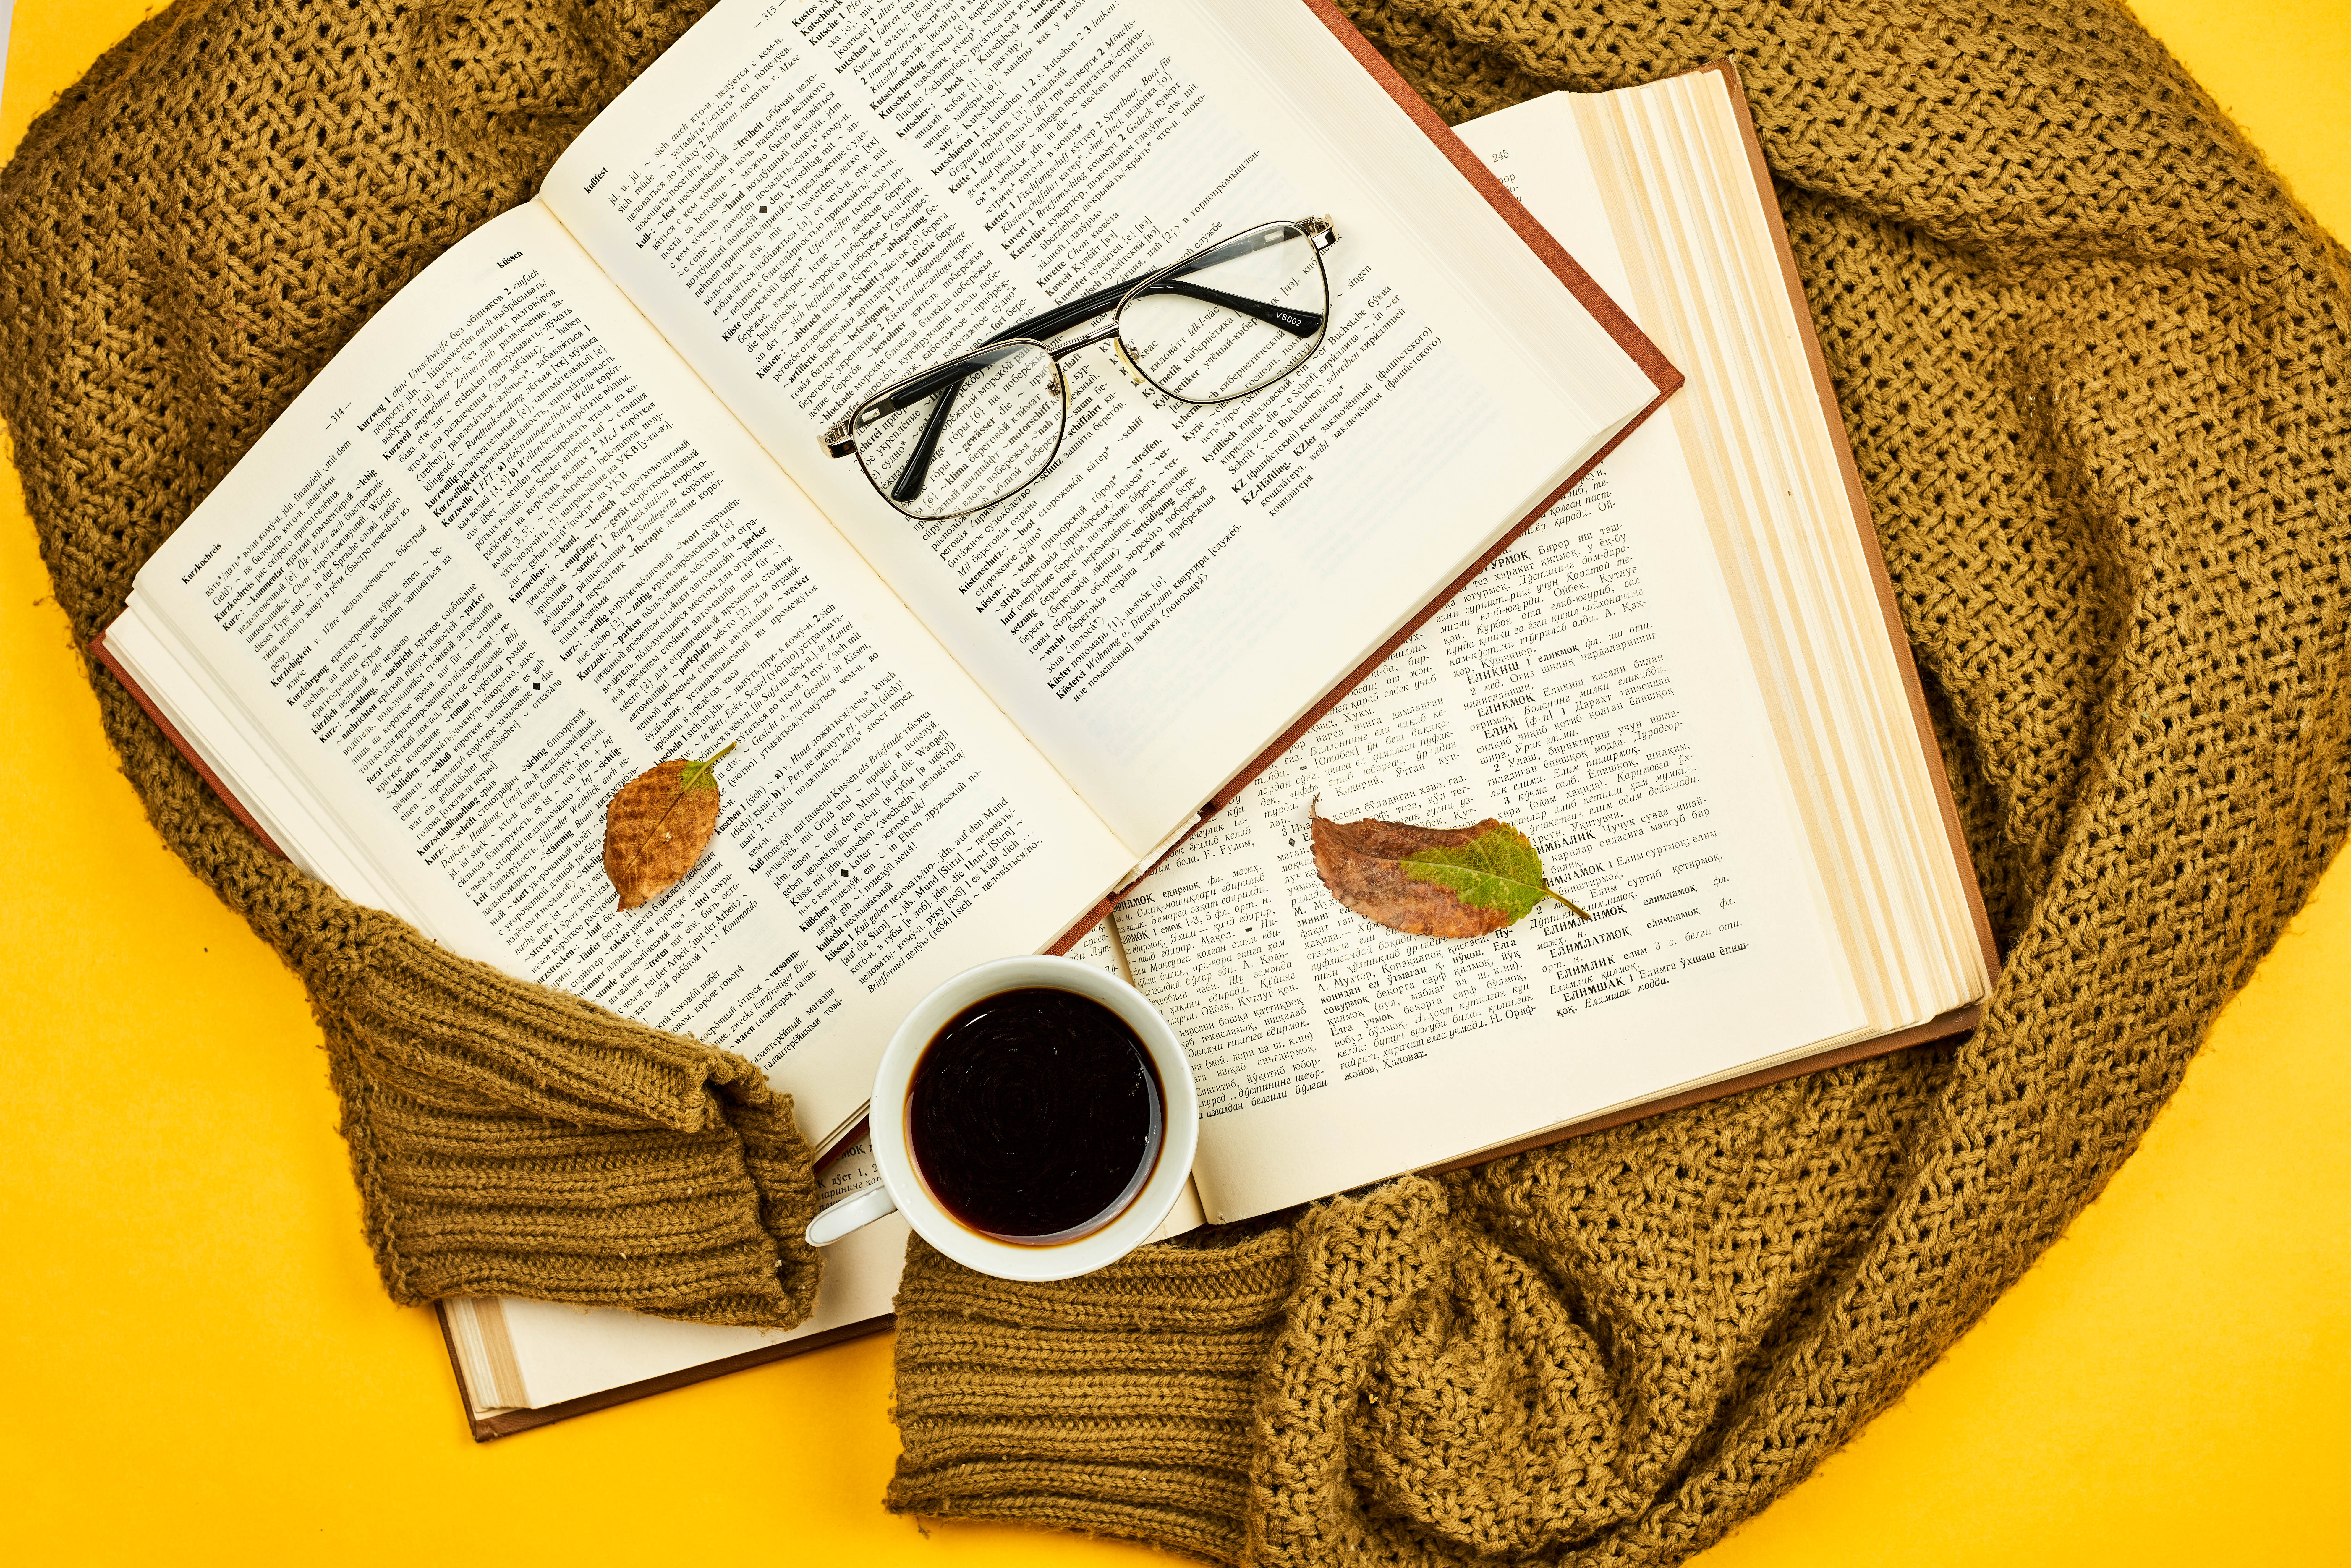 books, spectacles, leaves, miscellanea, miscellaneous, cup, glasses, mug, sweater